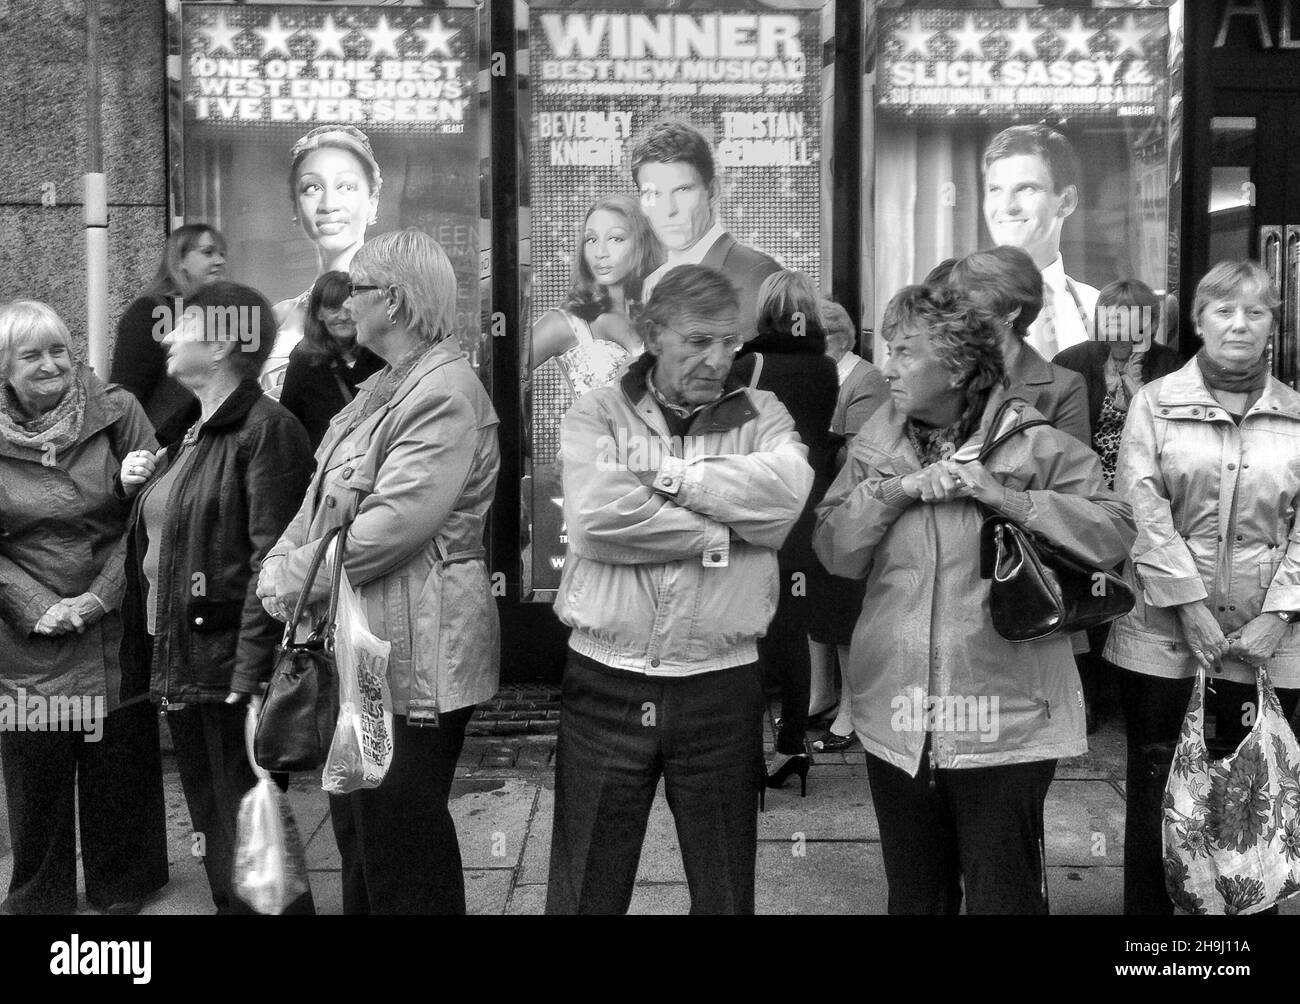 Theatre-goers waiting to be picked up after attending a performance of the Body Guard in London's west end (part of a series of images taken and processed on the iPhone by winner of the Terry O'Neill award mobile category, Richard Gray) Stock Photo